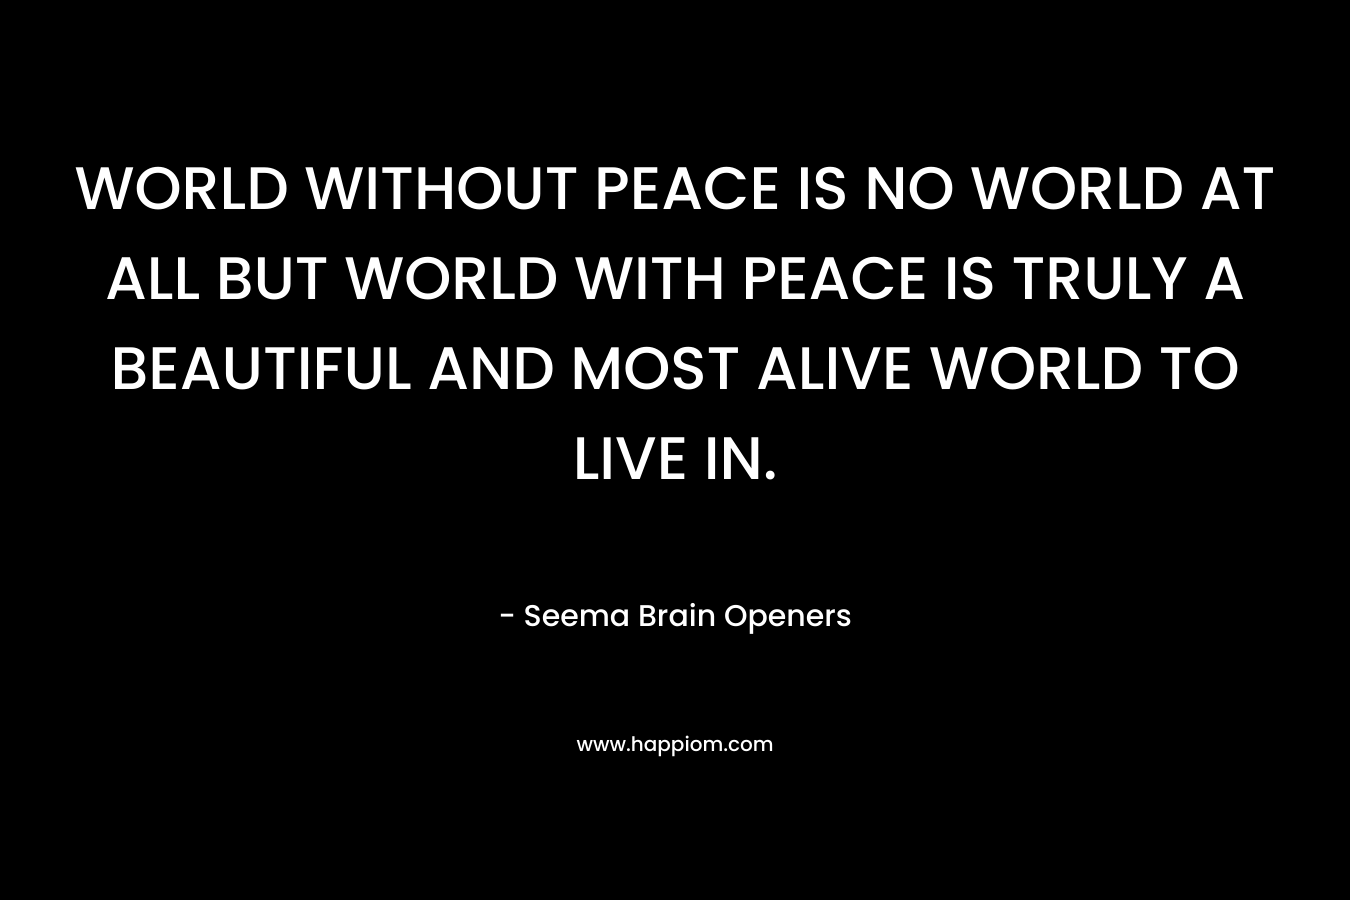 WORLD WITHOUT PEACE IS NO WORLD AT ALL BUT WORLD WITH PEACE IS TRULY A BEAUTIFUL AND MOST ALIVE WORLD TO LIVE IN.